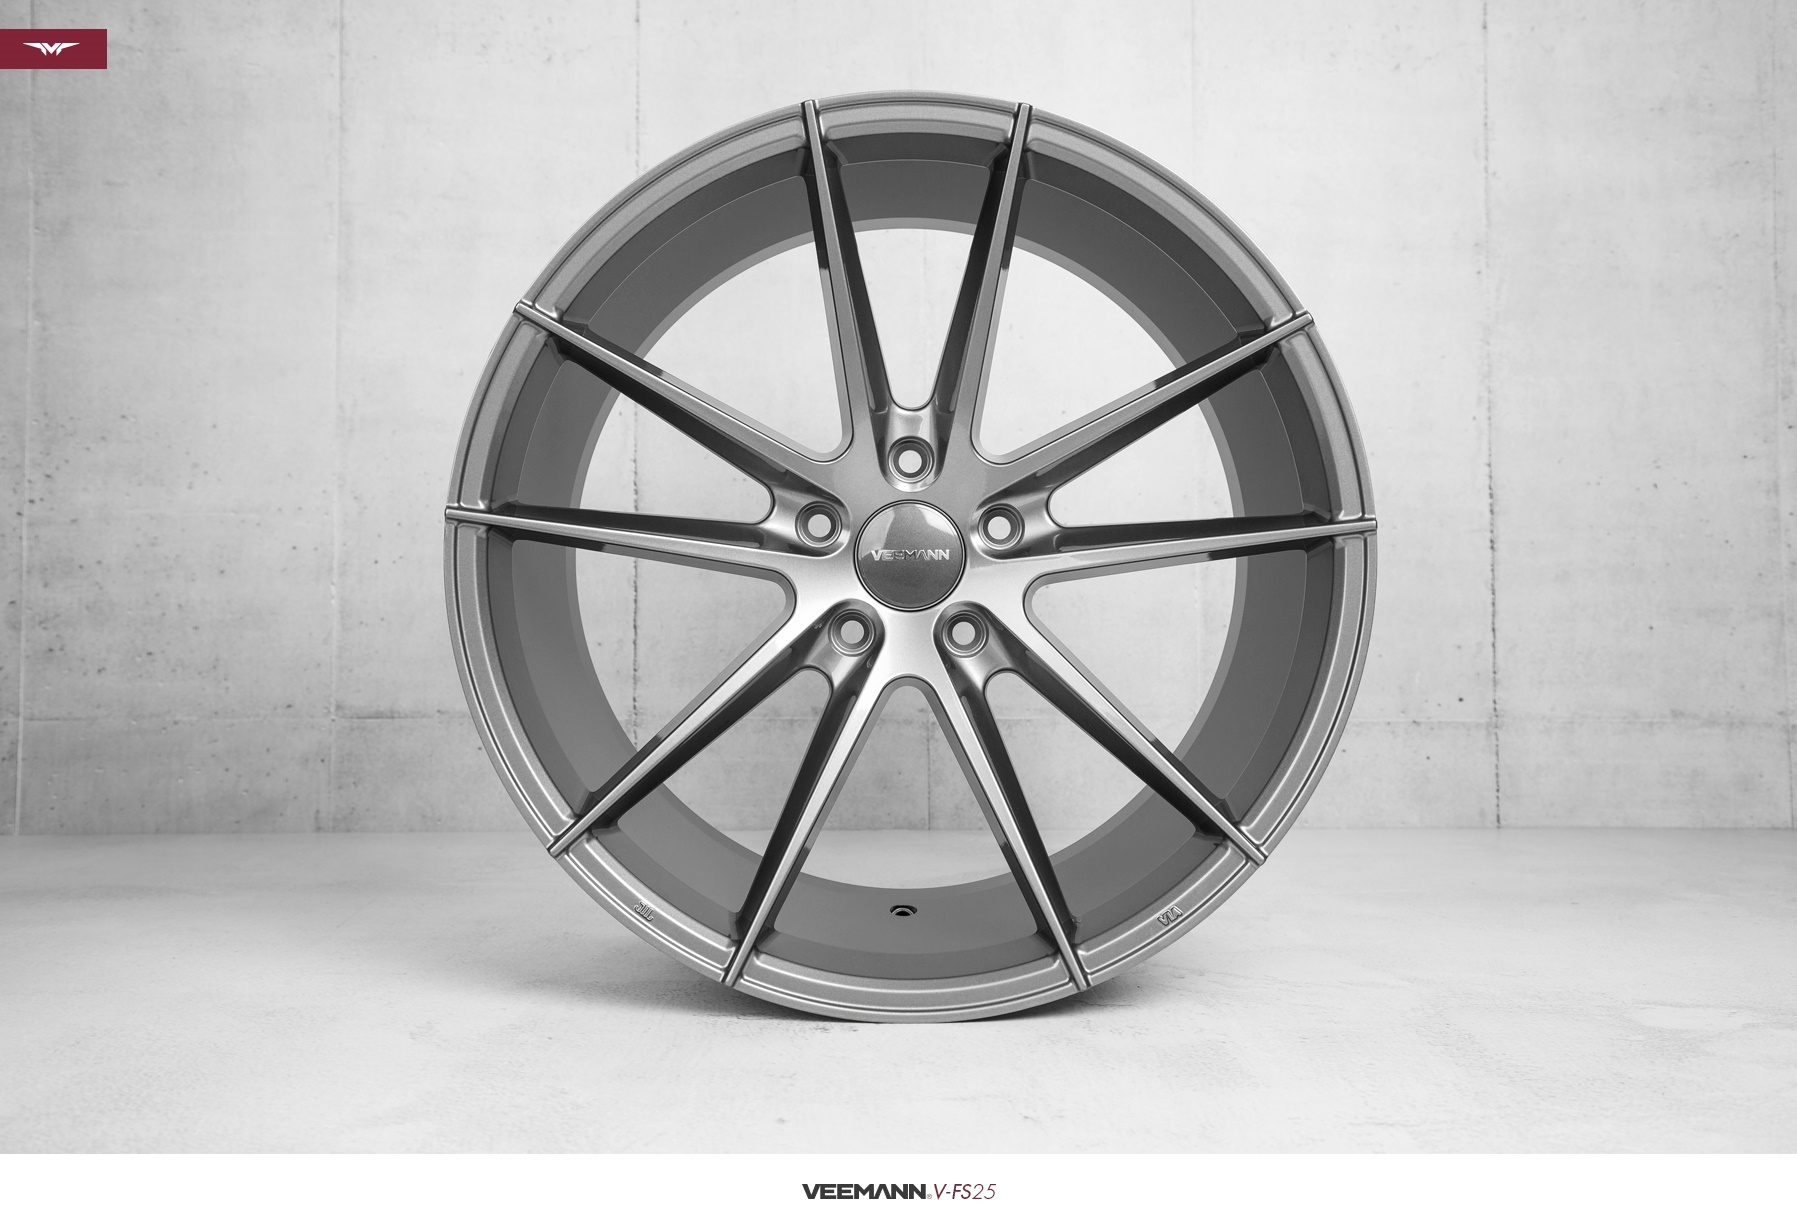 NEW 19  VEEMANN V FS25 ALLOY WHEELS IN GLOSS GRAPHITE WITH WIDER 9 5  REARS